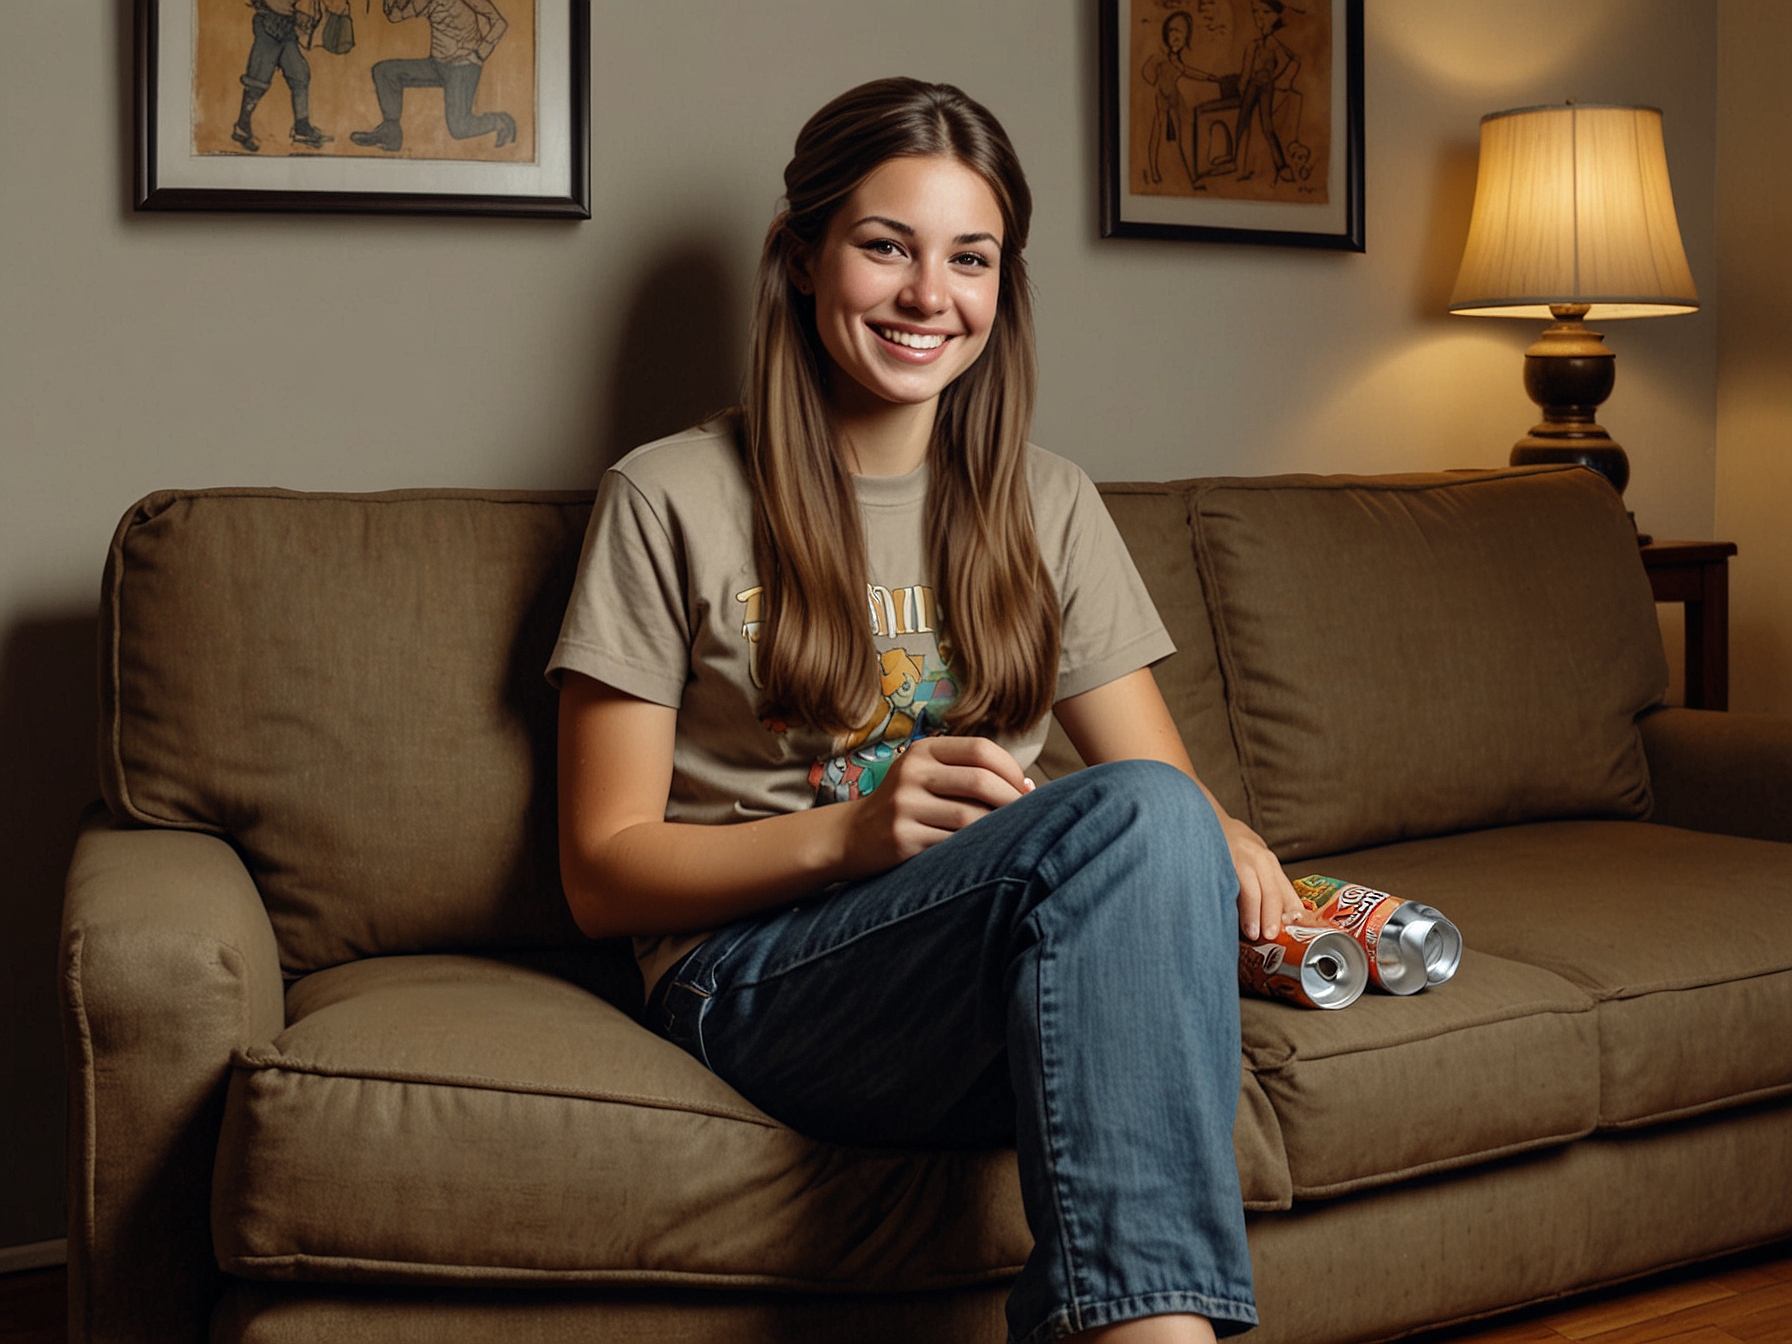 Susan Noles' 1970s throwback photo shows her sitting on a couch with long brown hair in ponytails, wearing a brown graphic tee and high-waisted jeans, holding a soda can and smiling.